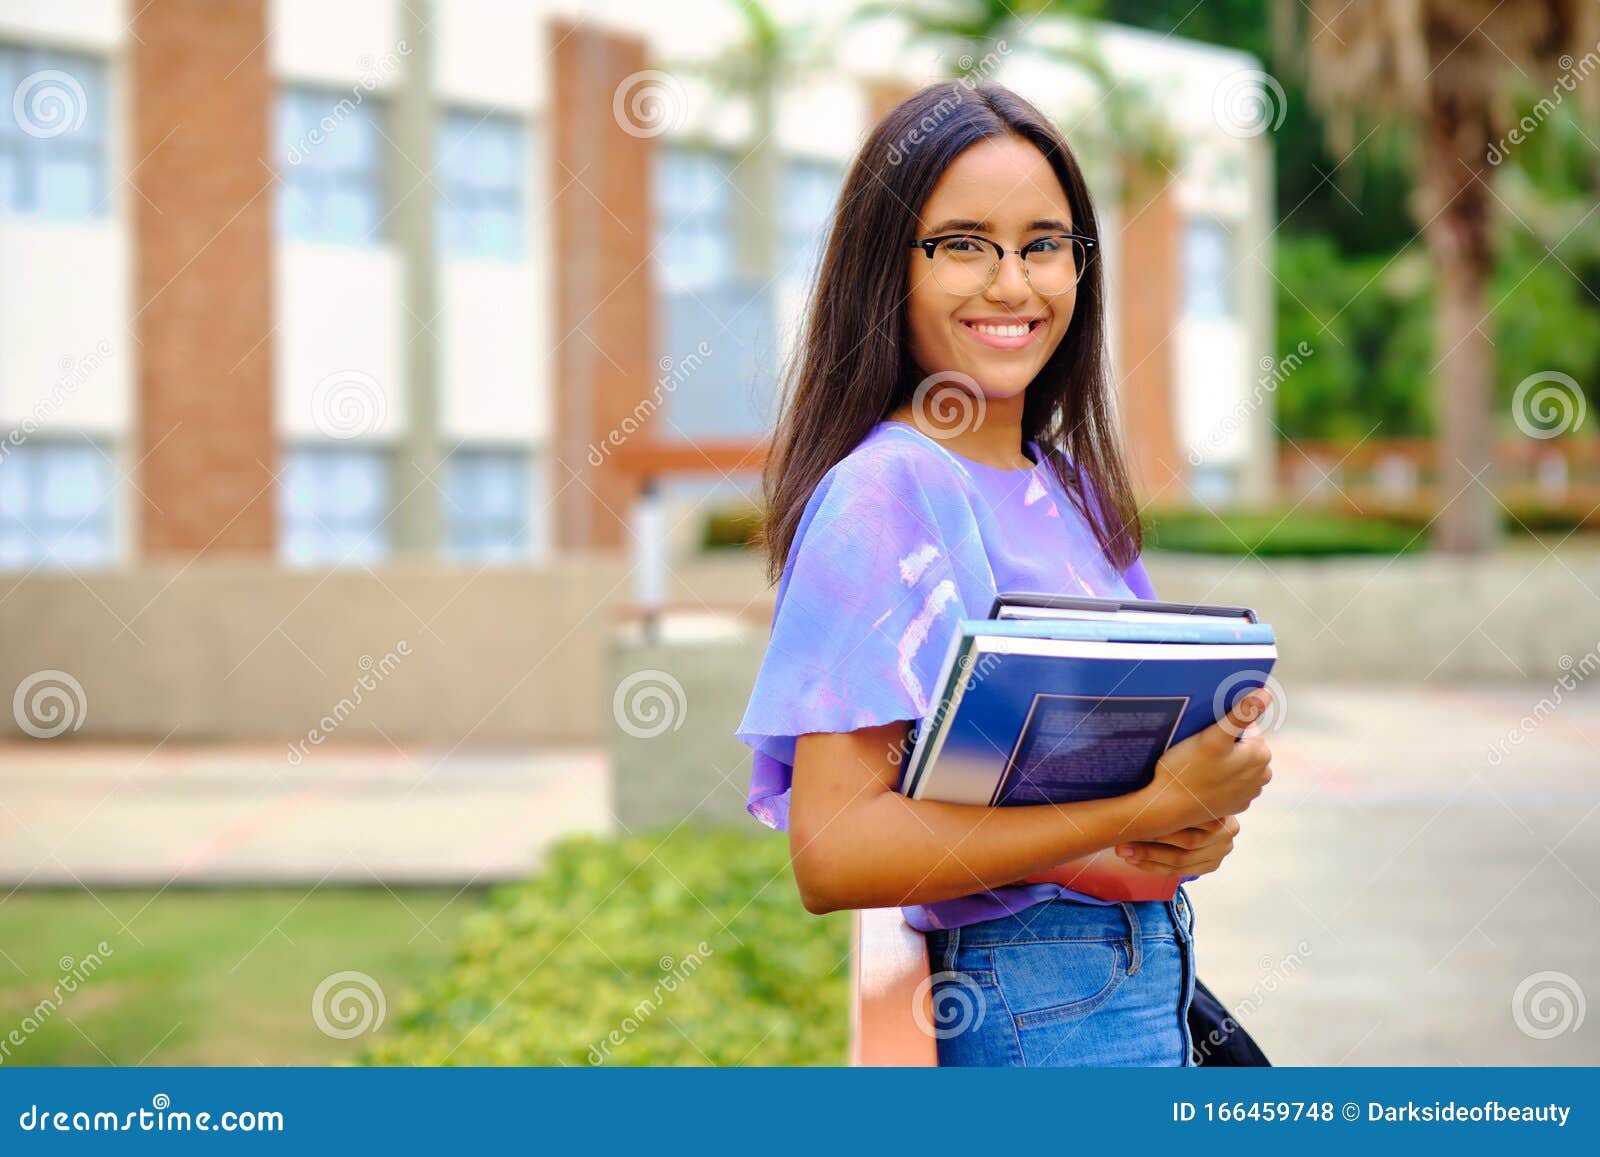 20s years student smiling outdoor in university campus